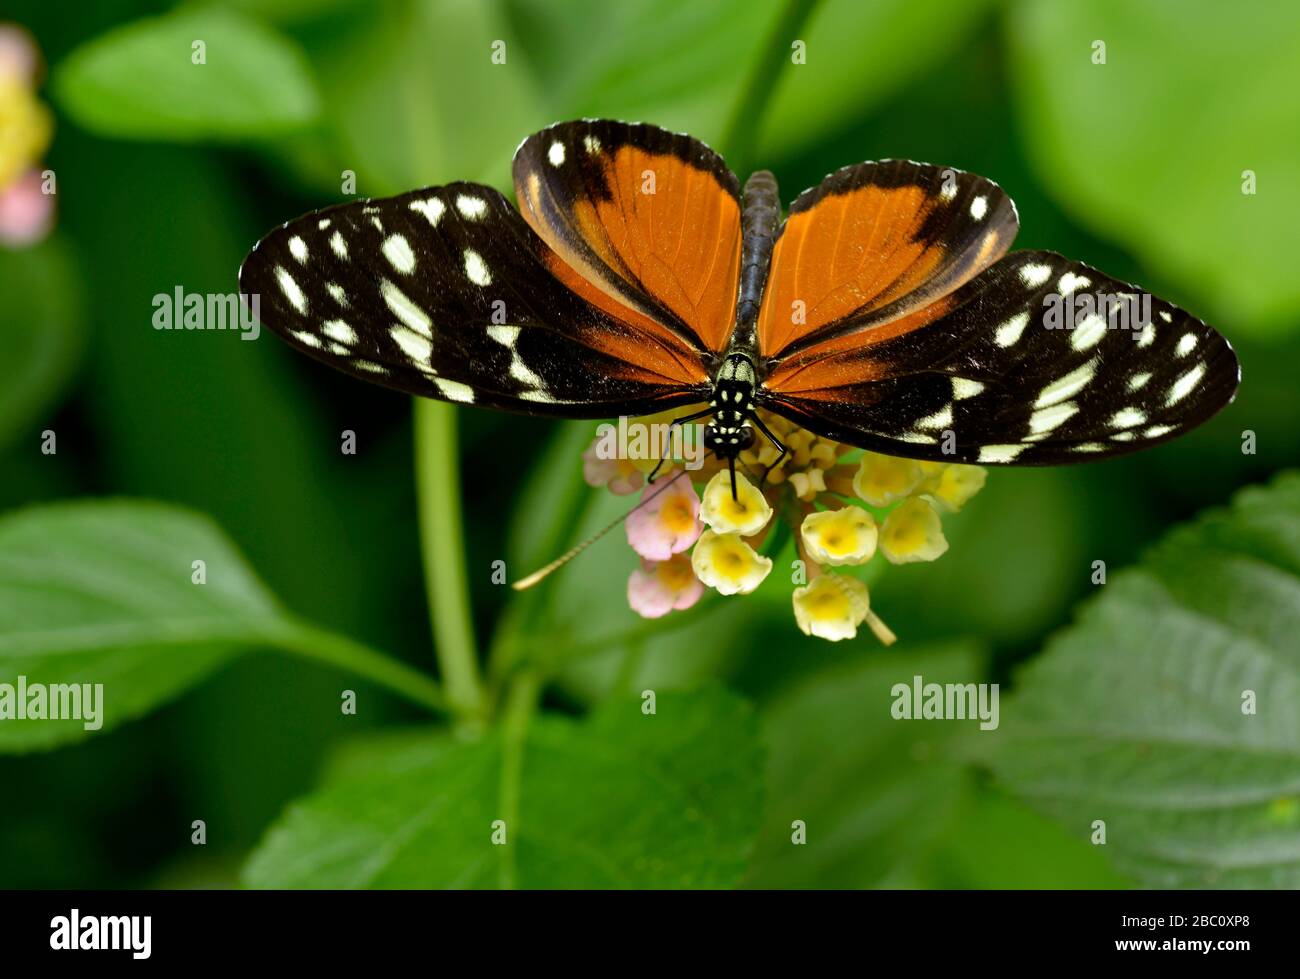 Macro of  Tiger Longwing (Heliconius hecale) butterfly feeding on flower (Lantana camara) seen from above Stock Photo